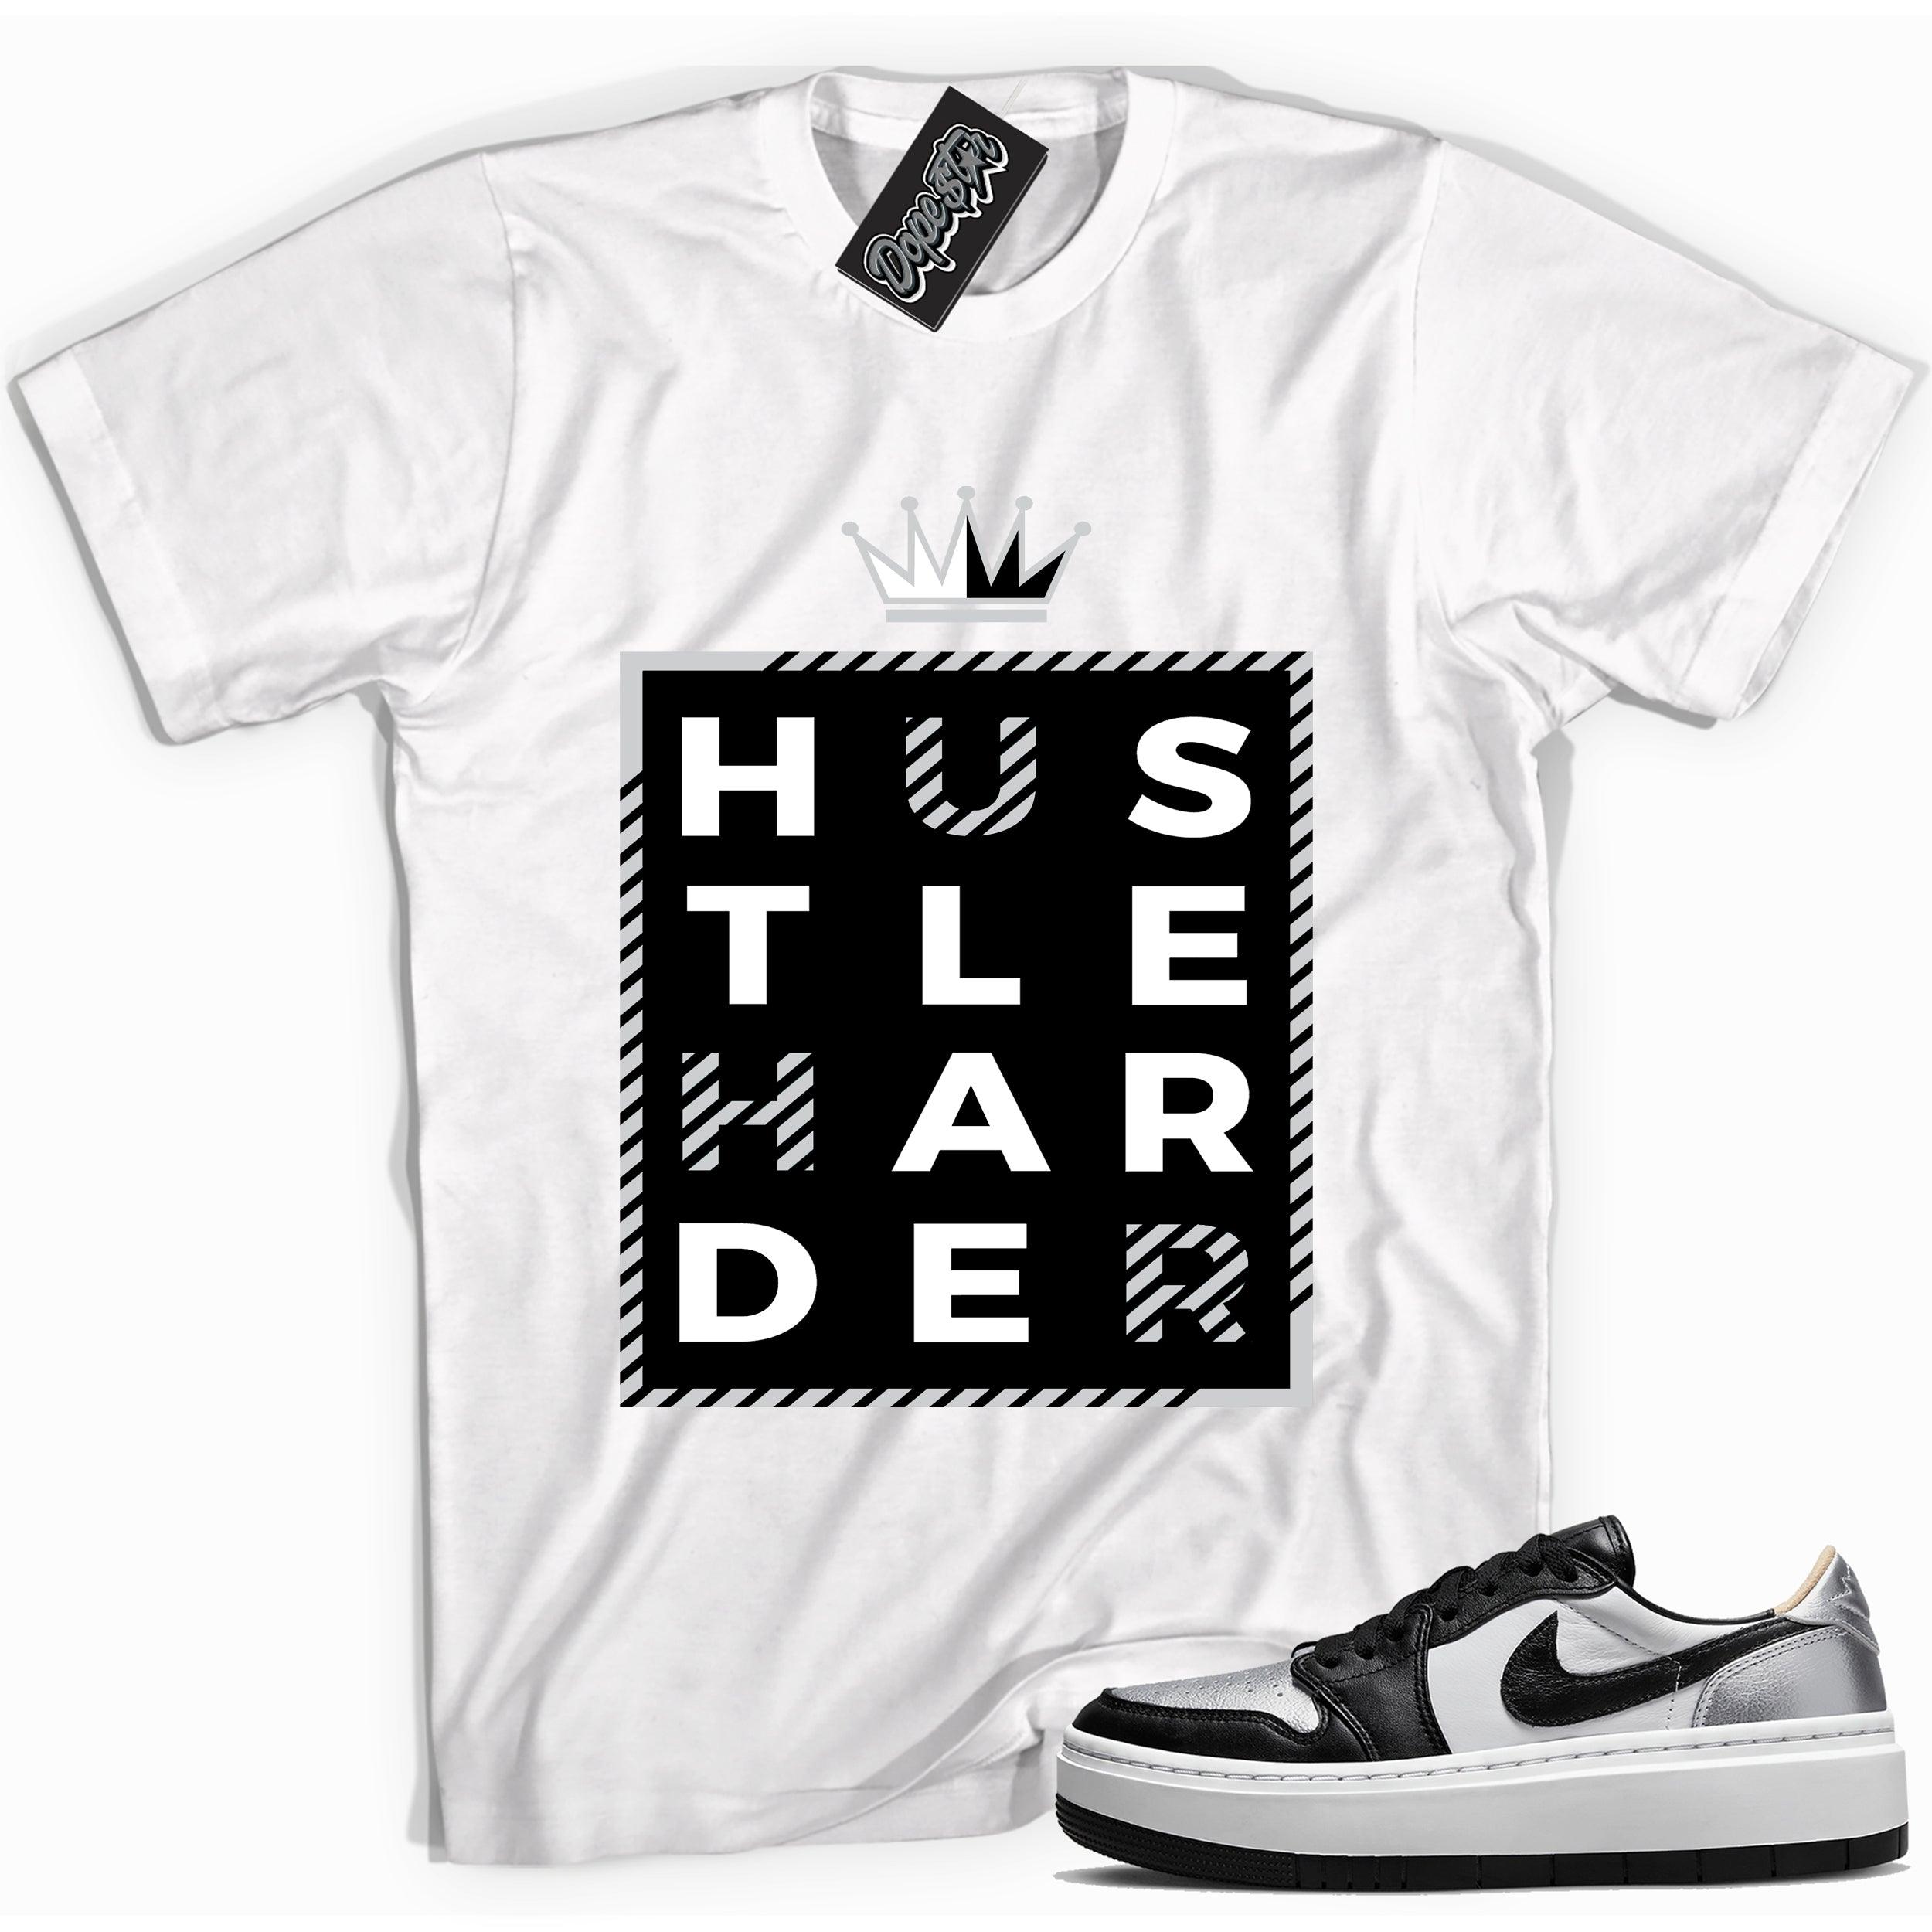 Cool white graphic tee with 'hustle harder' print, that perfectly matches Air Jordan 1 Elevate Low SE Silver Toe sneakers.